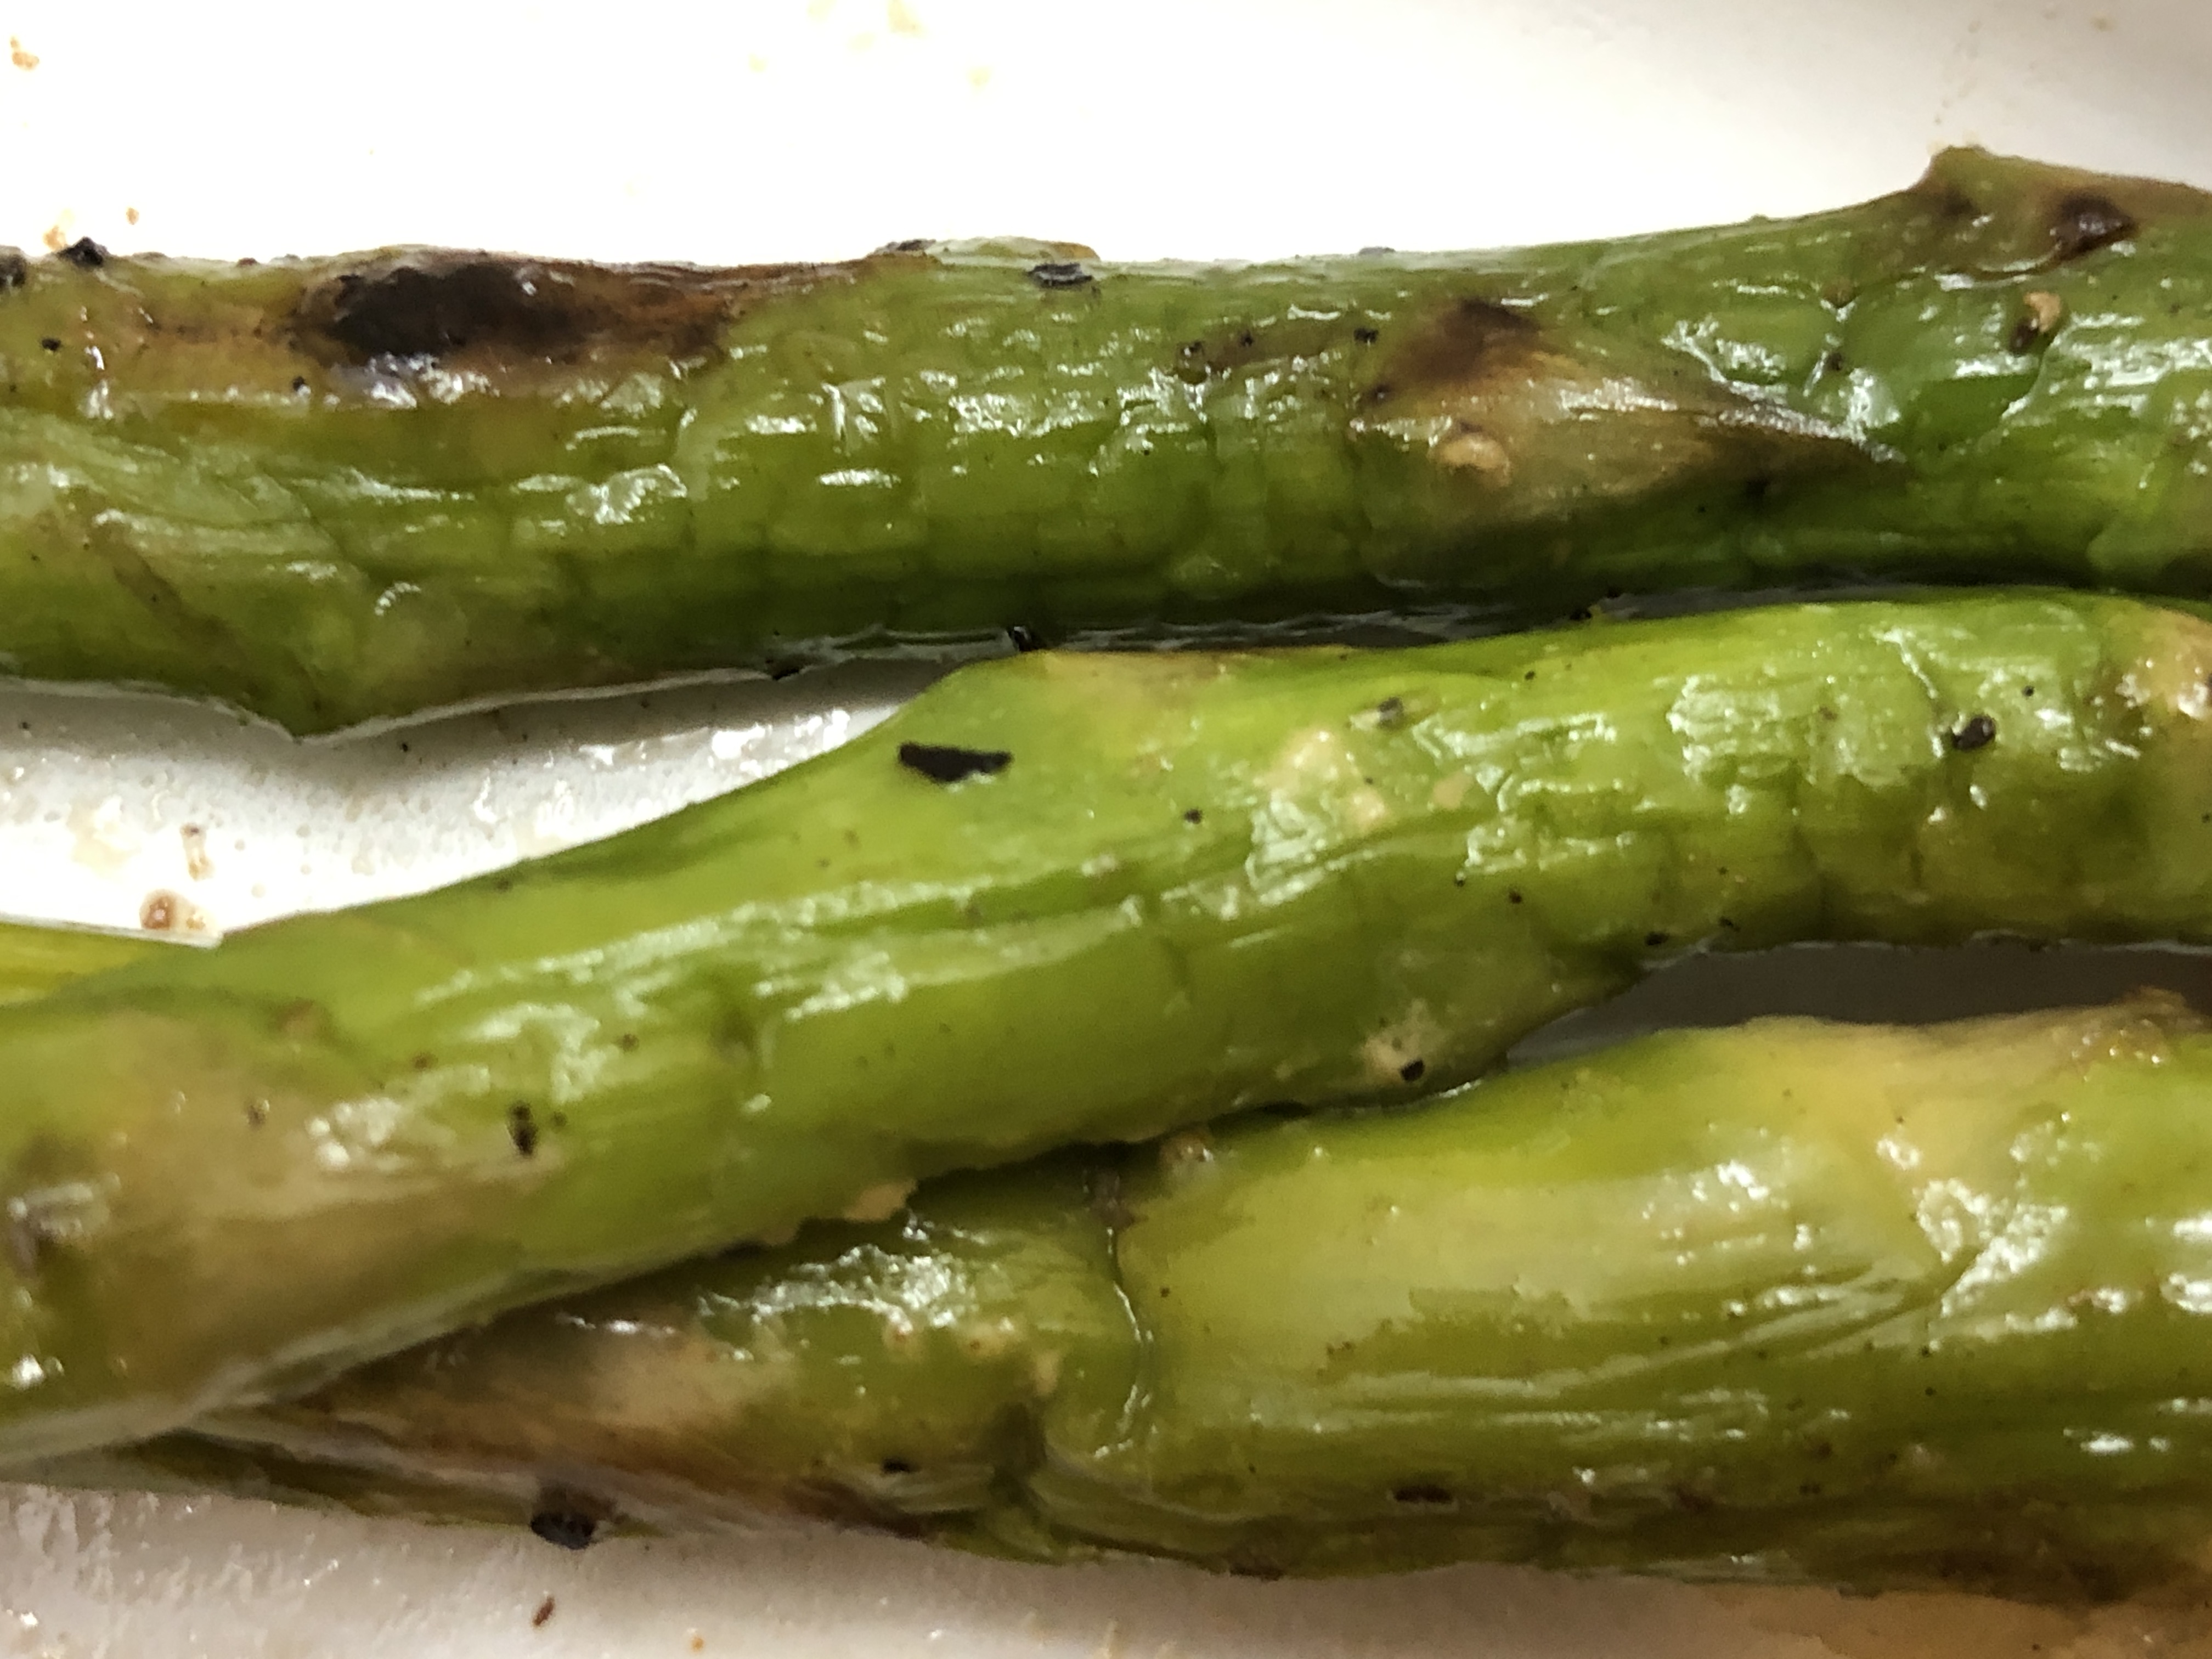 https://upload.wikimedia.org/wikipedia/commons/0/05/2022-02-14_21_49_10_Asparagus_from_an_Outback_Steakhouse_Bloomin%27_Fried_Chicken_meal_in_the_Franklin_Farm_section_of_Oak_Hill%2C_Fairfax_County%2C_Virginia.jpg